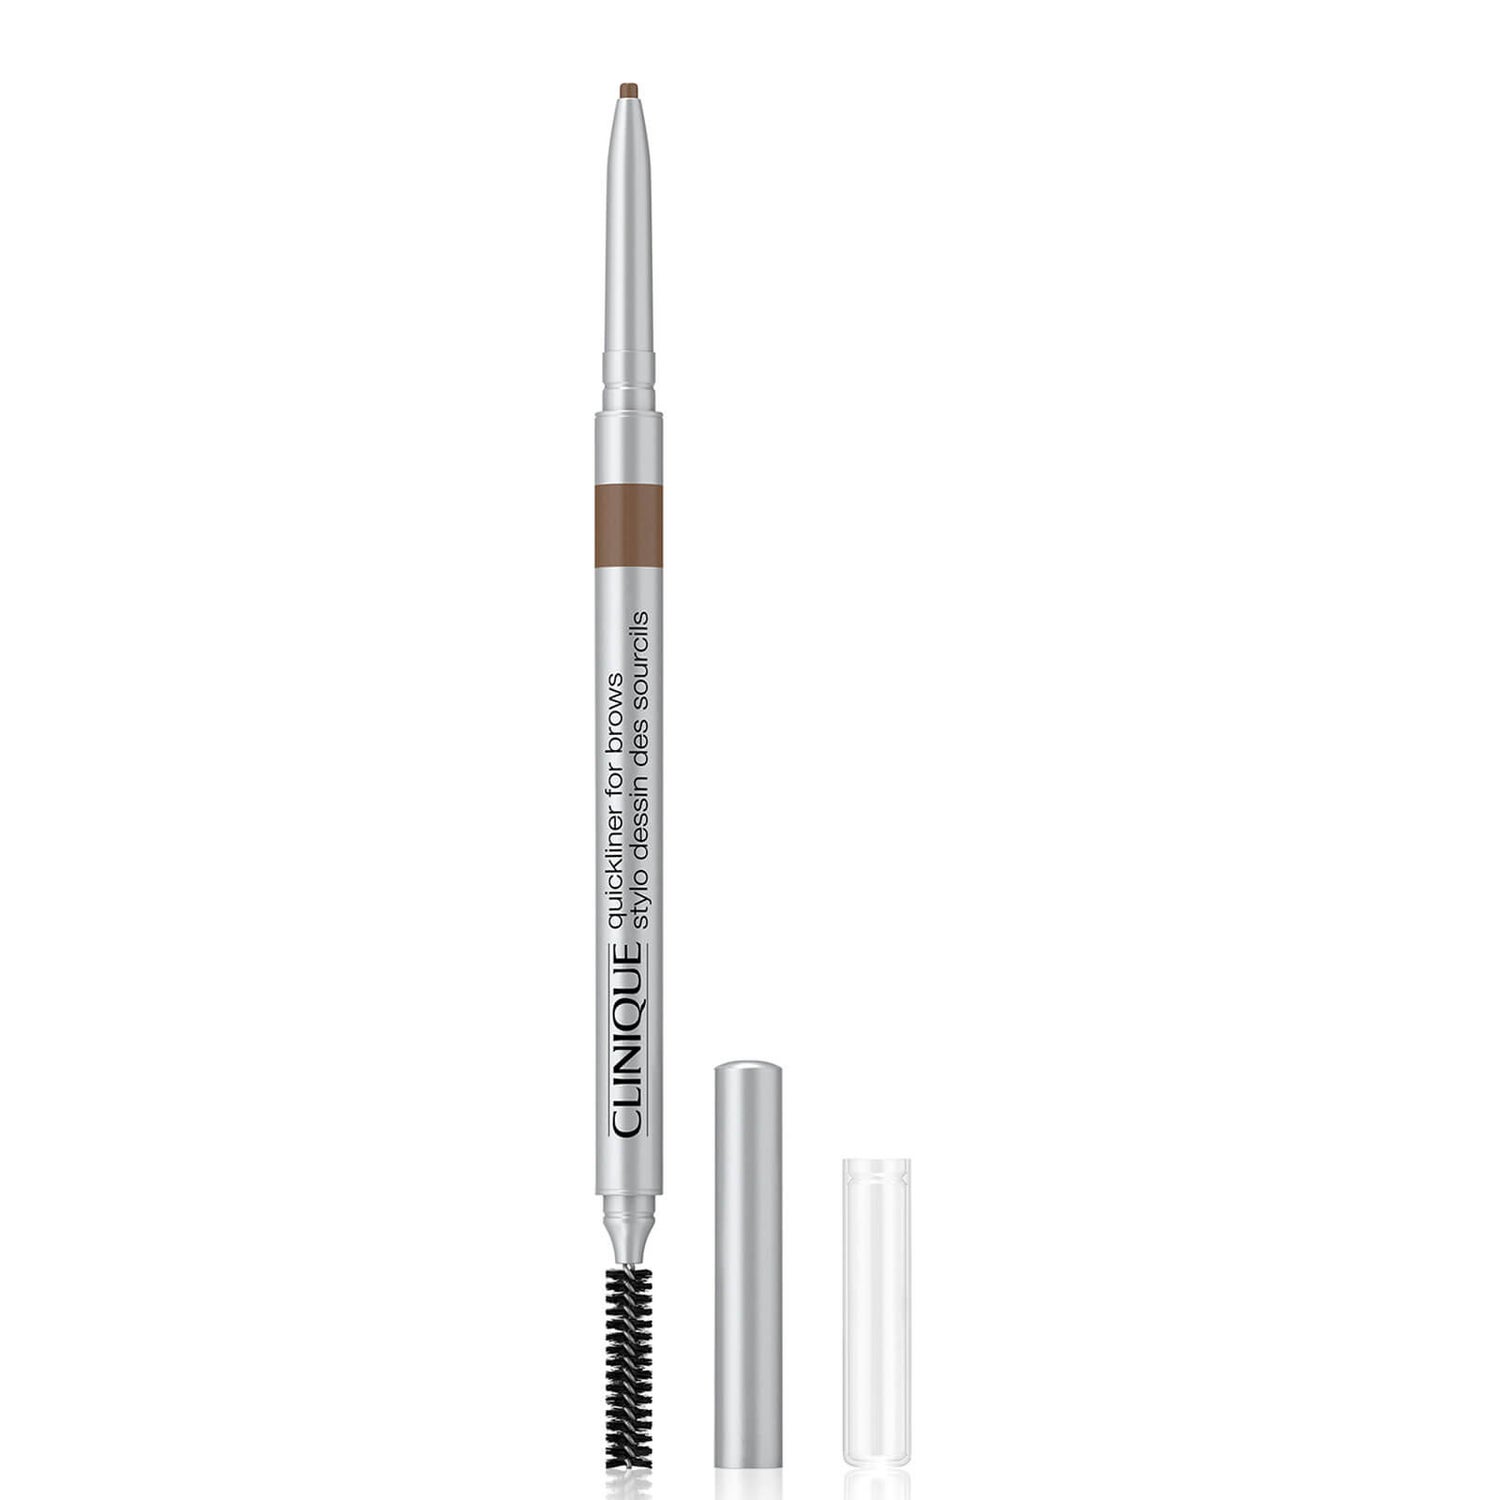 Clinique Quickliner for Brows 0.06g (Various Shades)